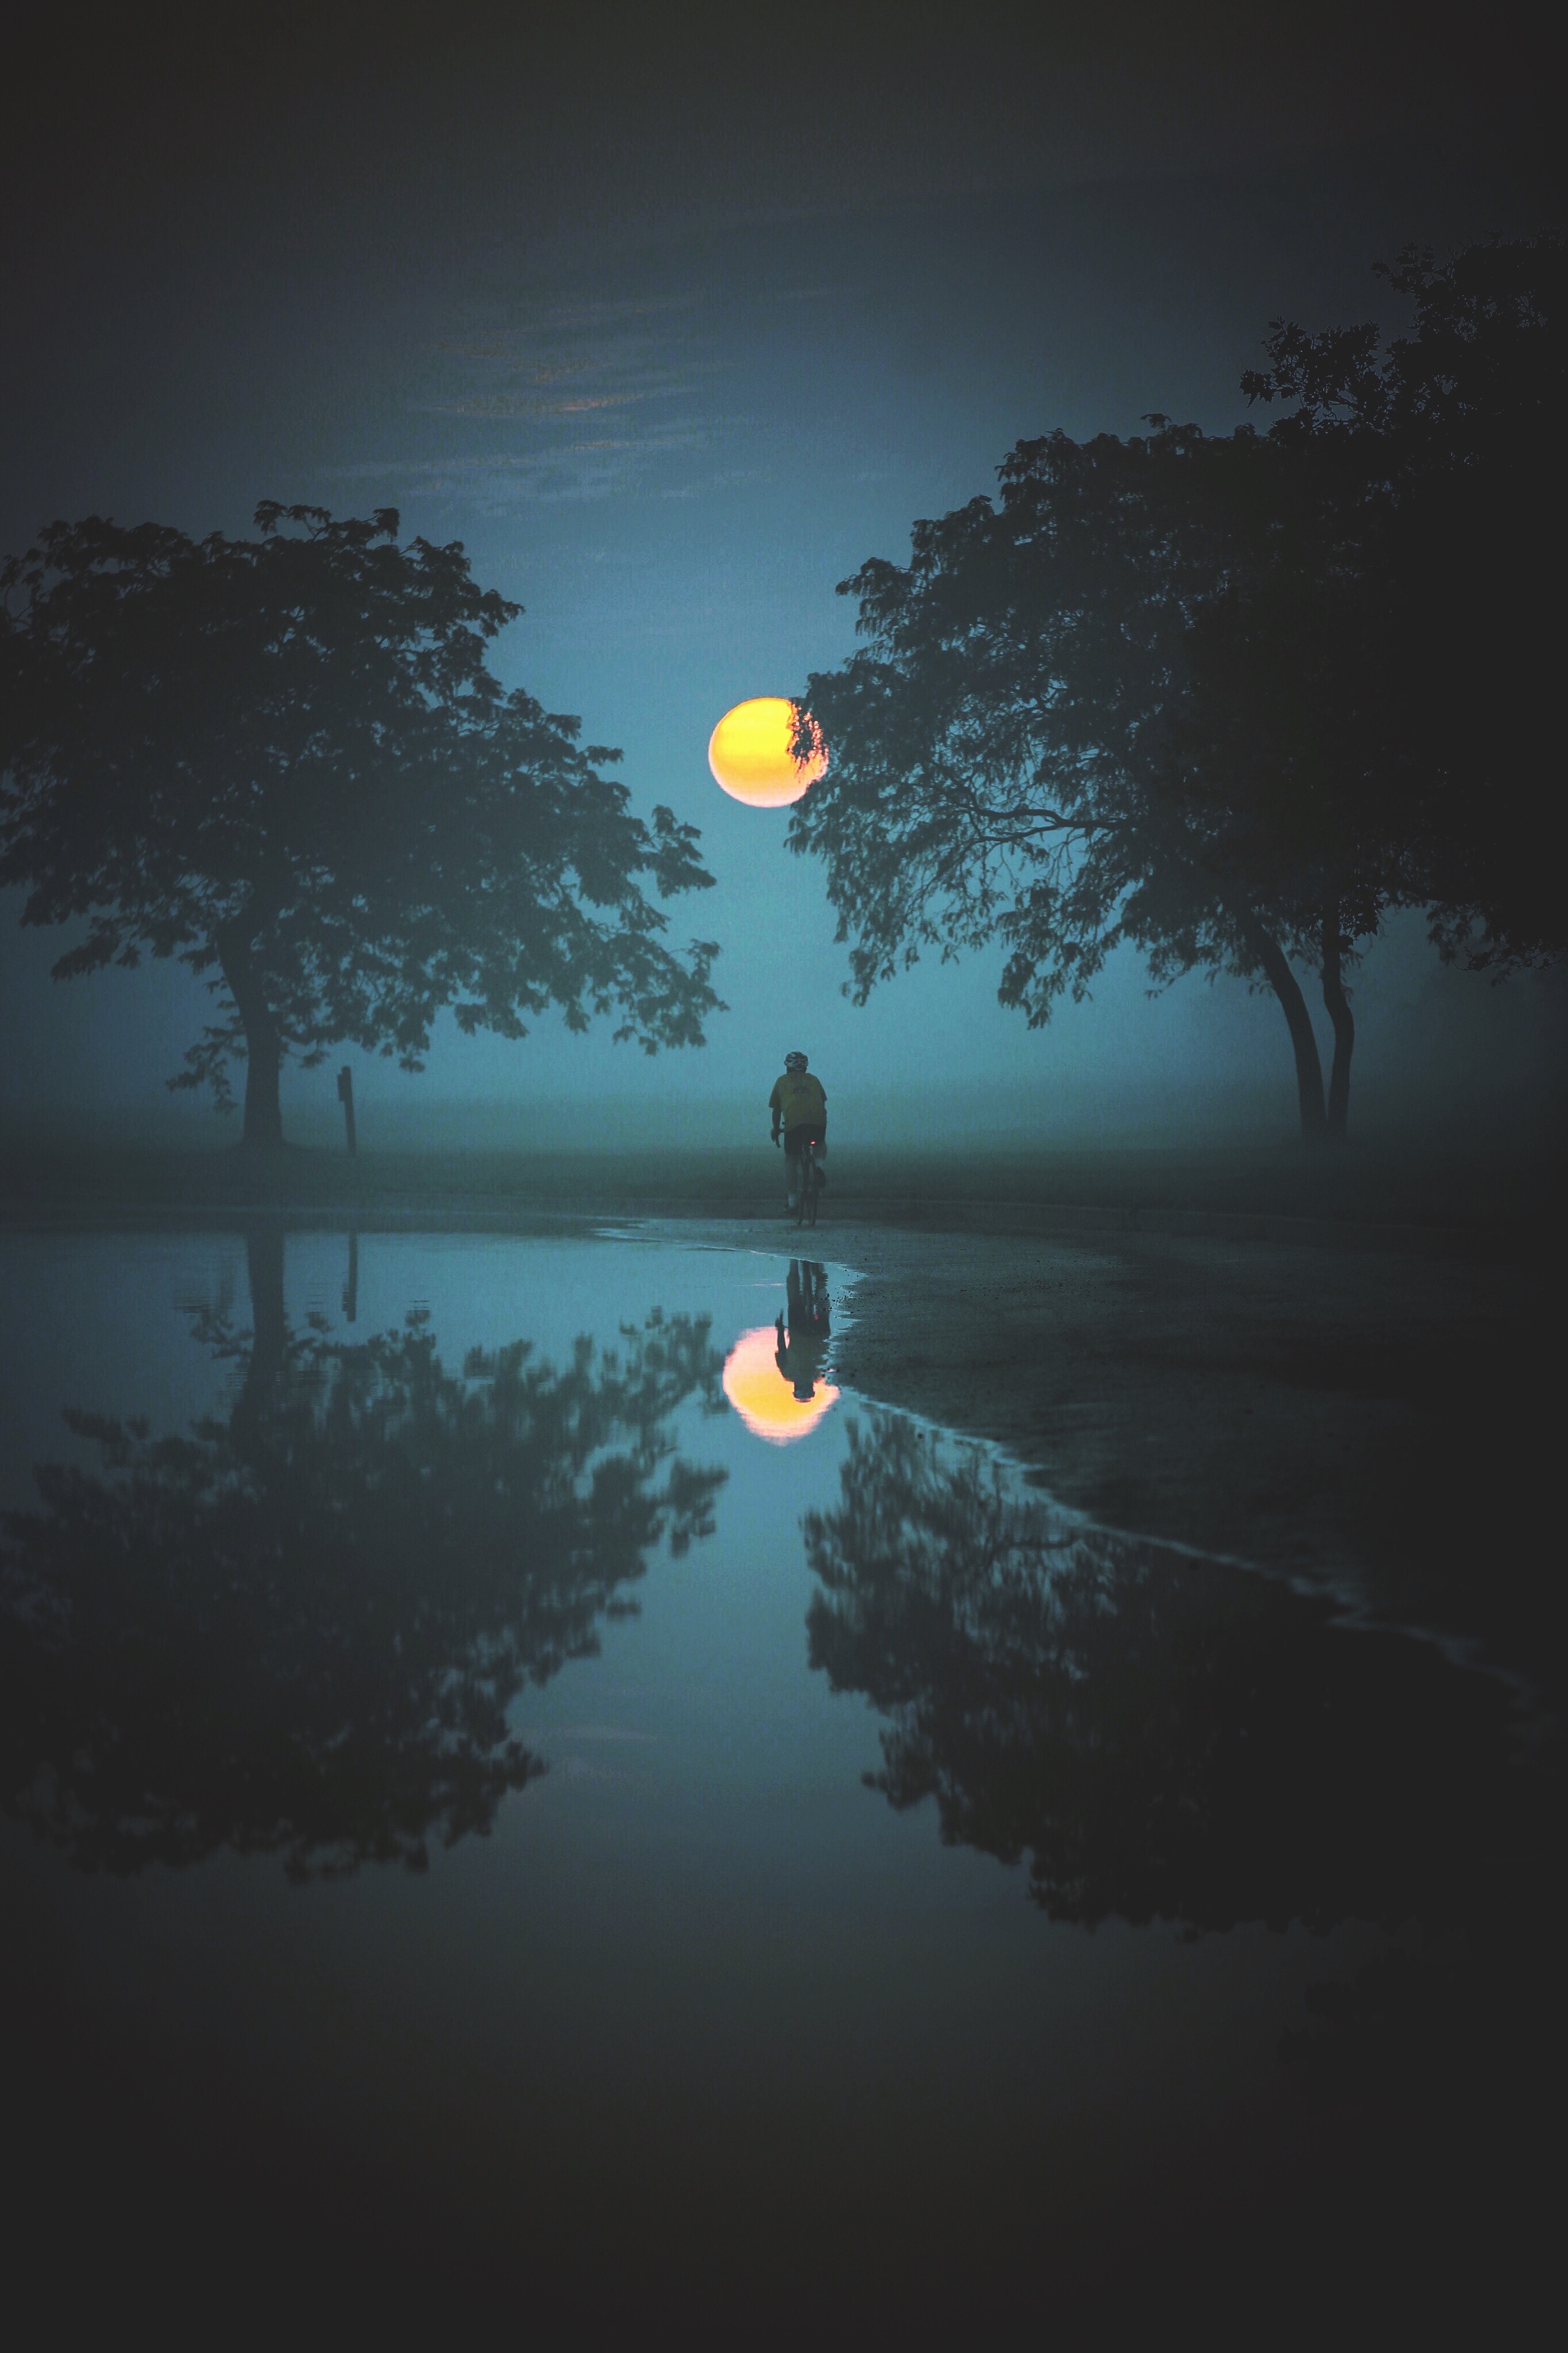 reflection, moon, cyclist, nature, water, trees, fog phone background